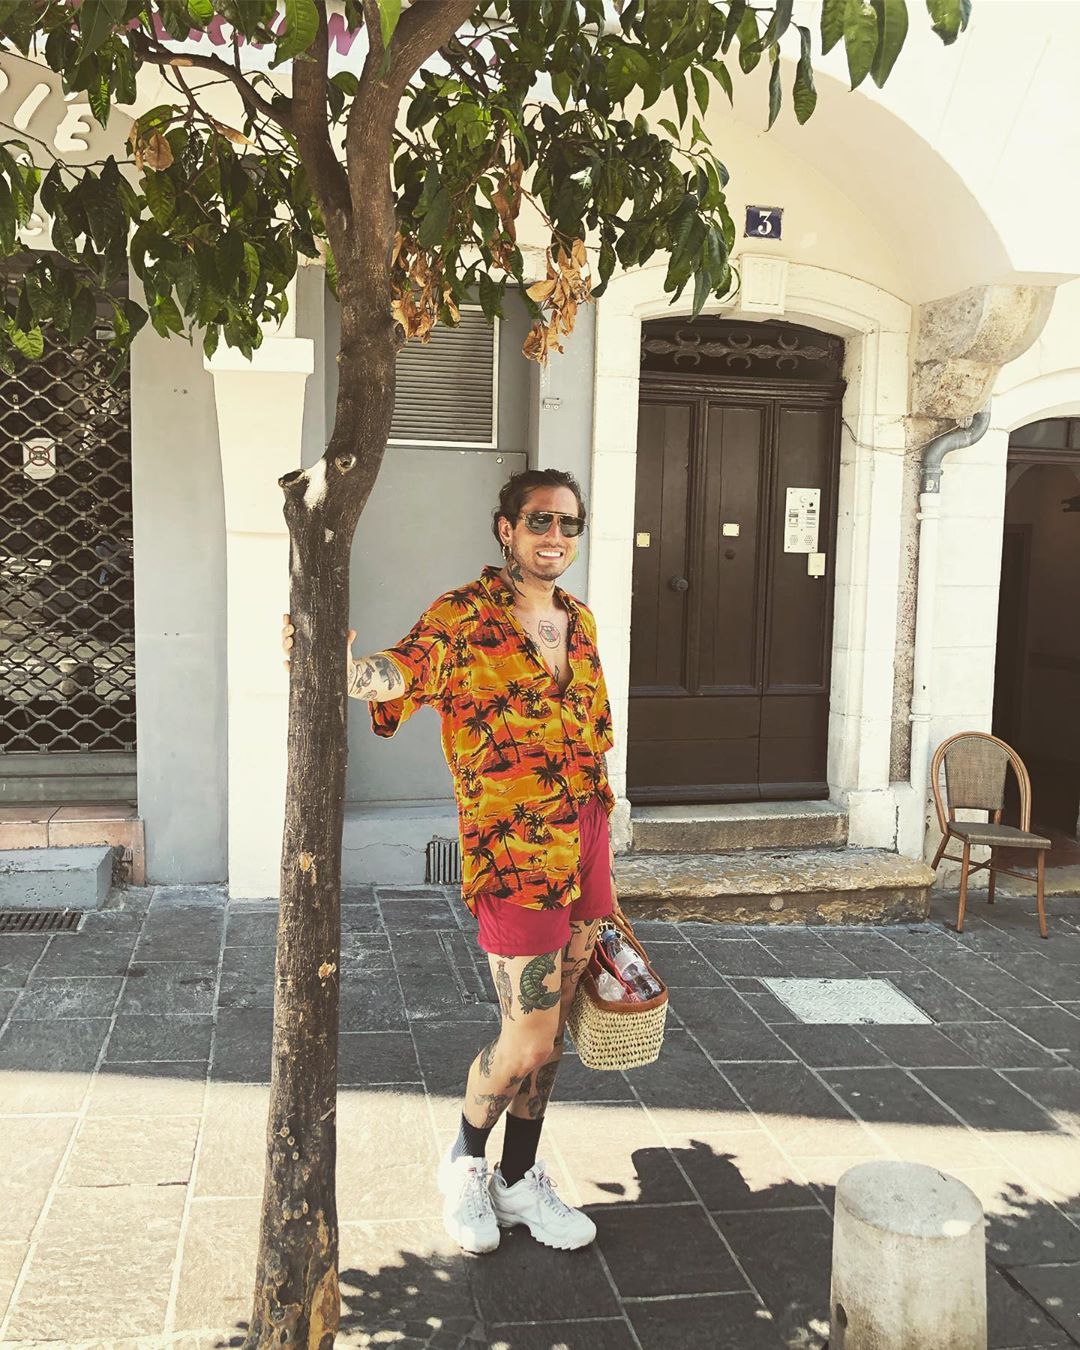 Darroch Putnam in the French Riviera. Image courtesy of his Instagram